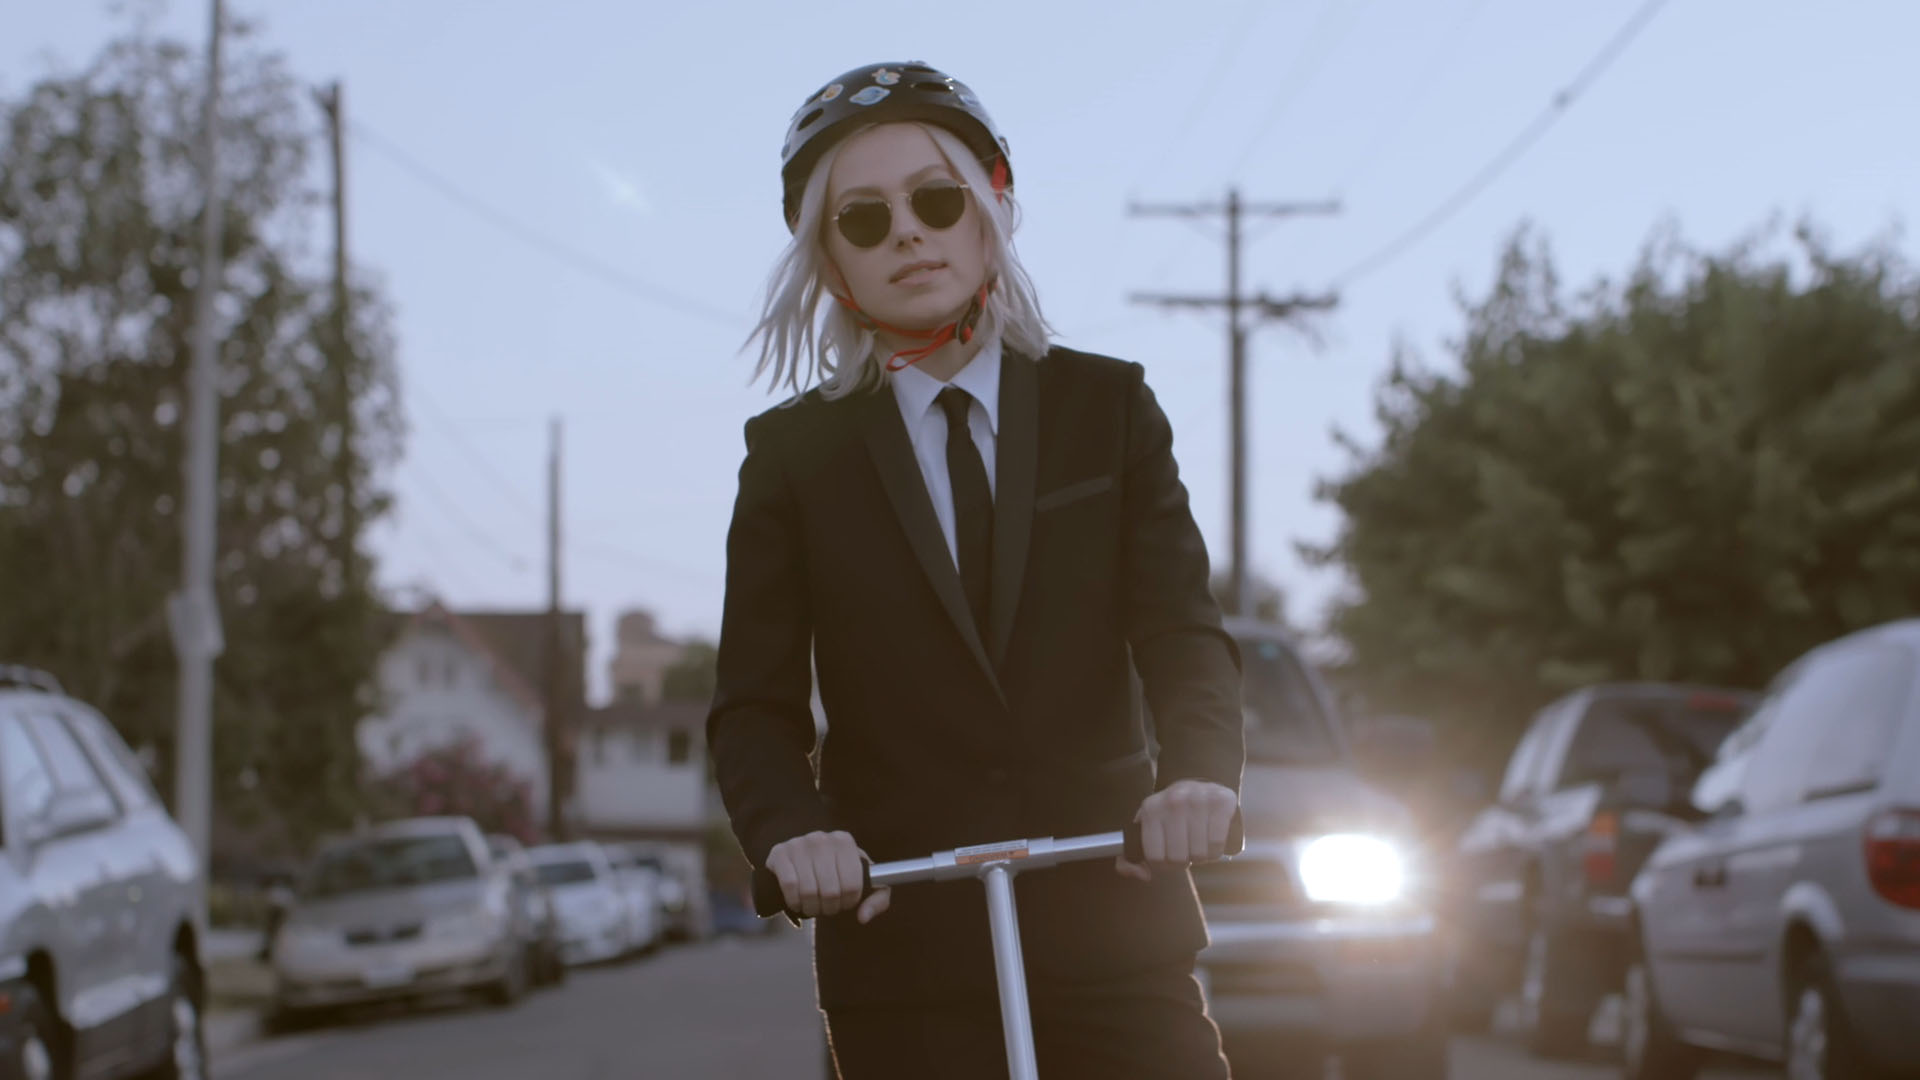 Phoebe Bridgers releases video for "Would You Rather"